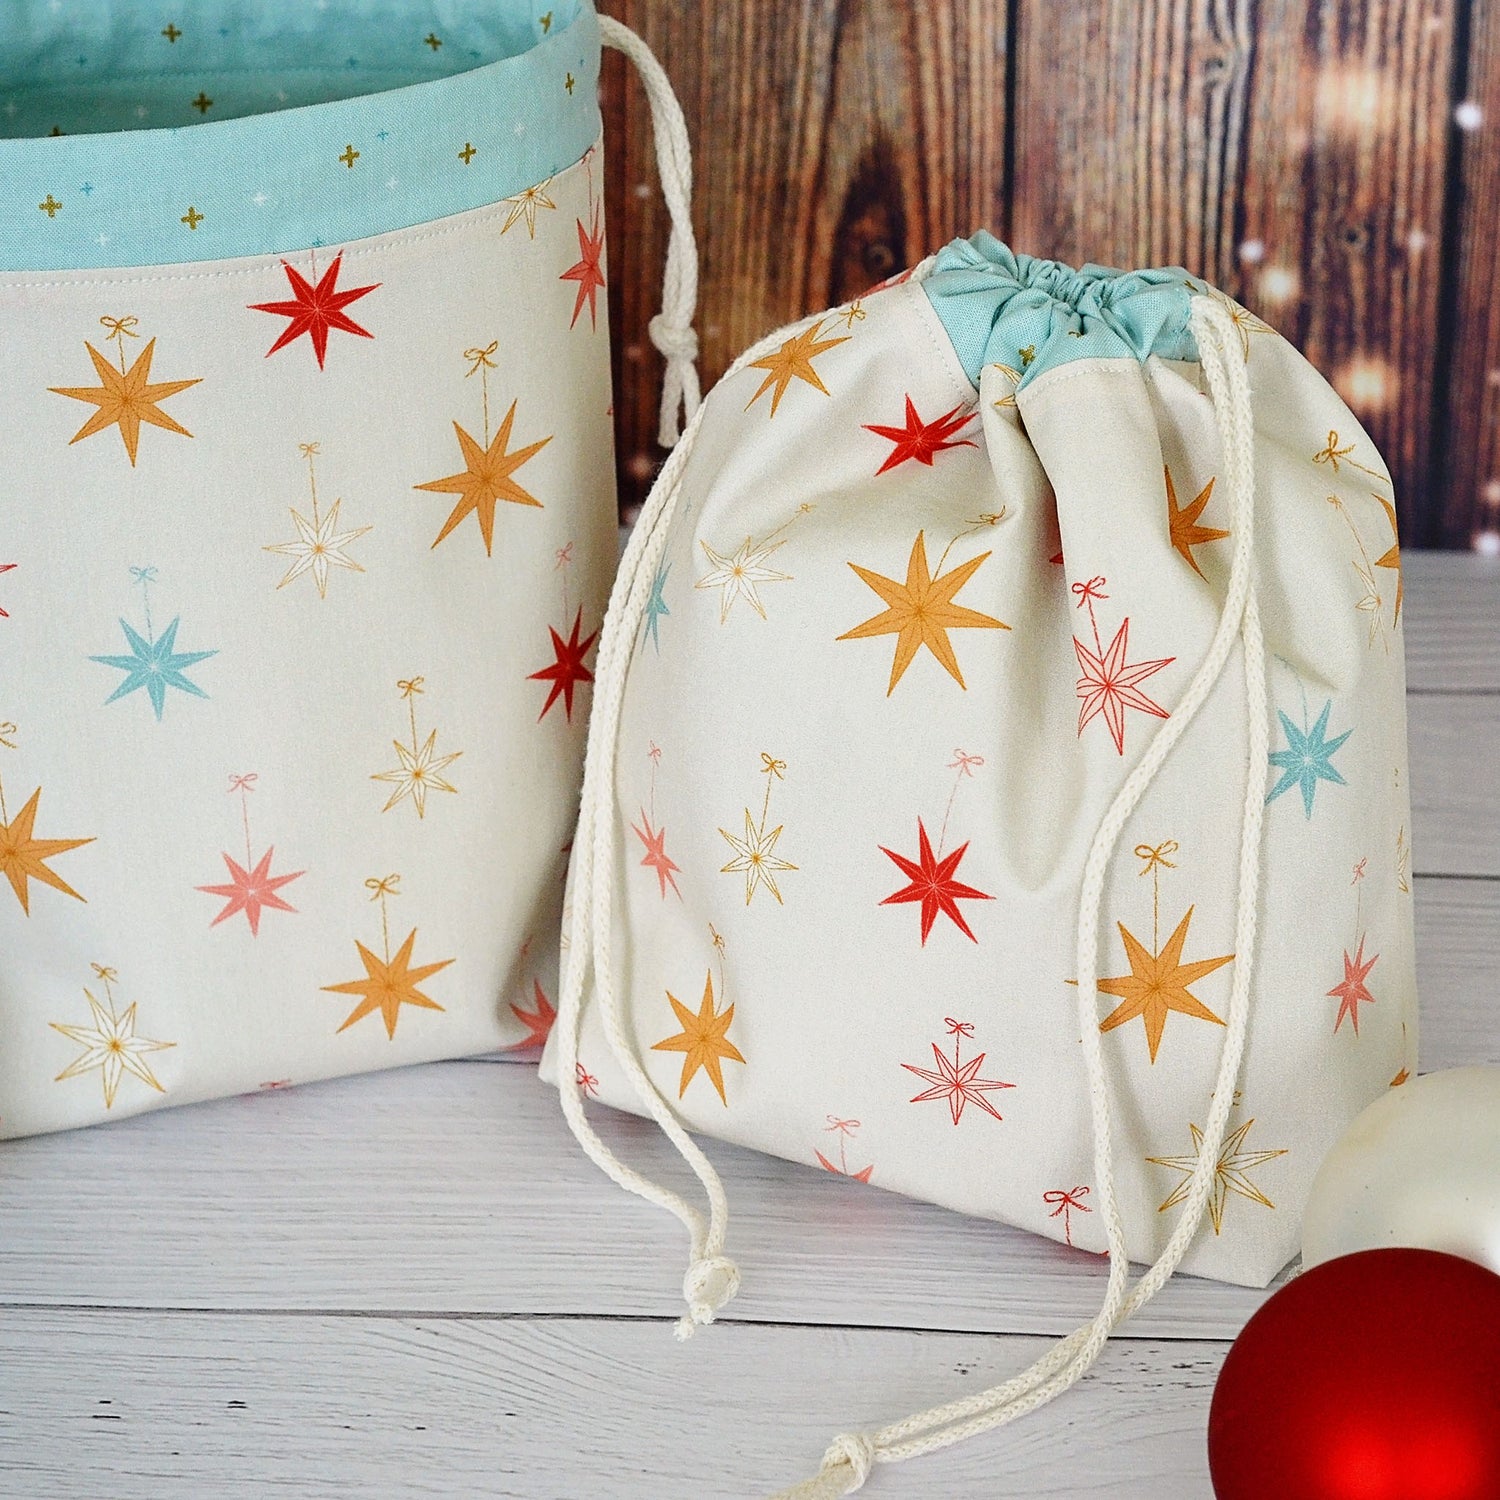 Pretty Christmas Stars bags with an aqua lining and gold accents.  Handmade in Canada.